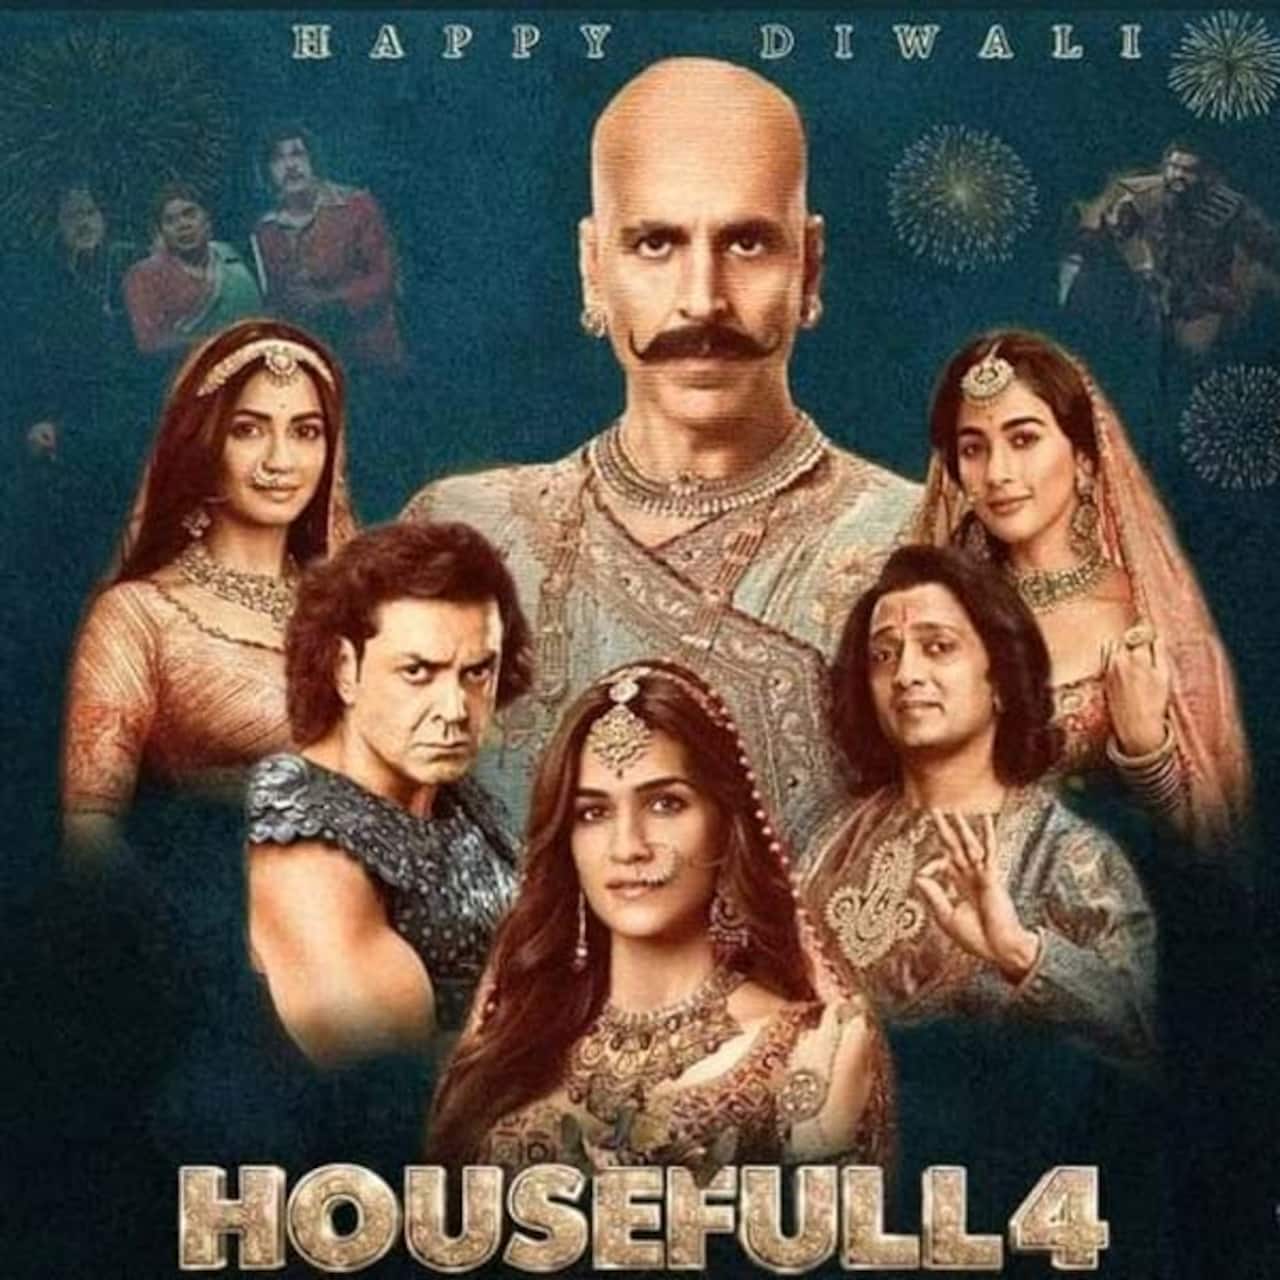 Housefull 4 box office collection day 4 early estimates: Akshay Kumar's reincarnation comedy inches closer to Rs 100 crore mark